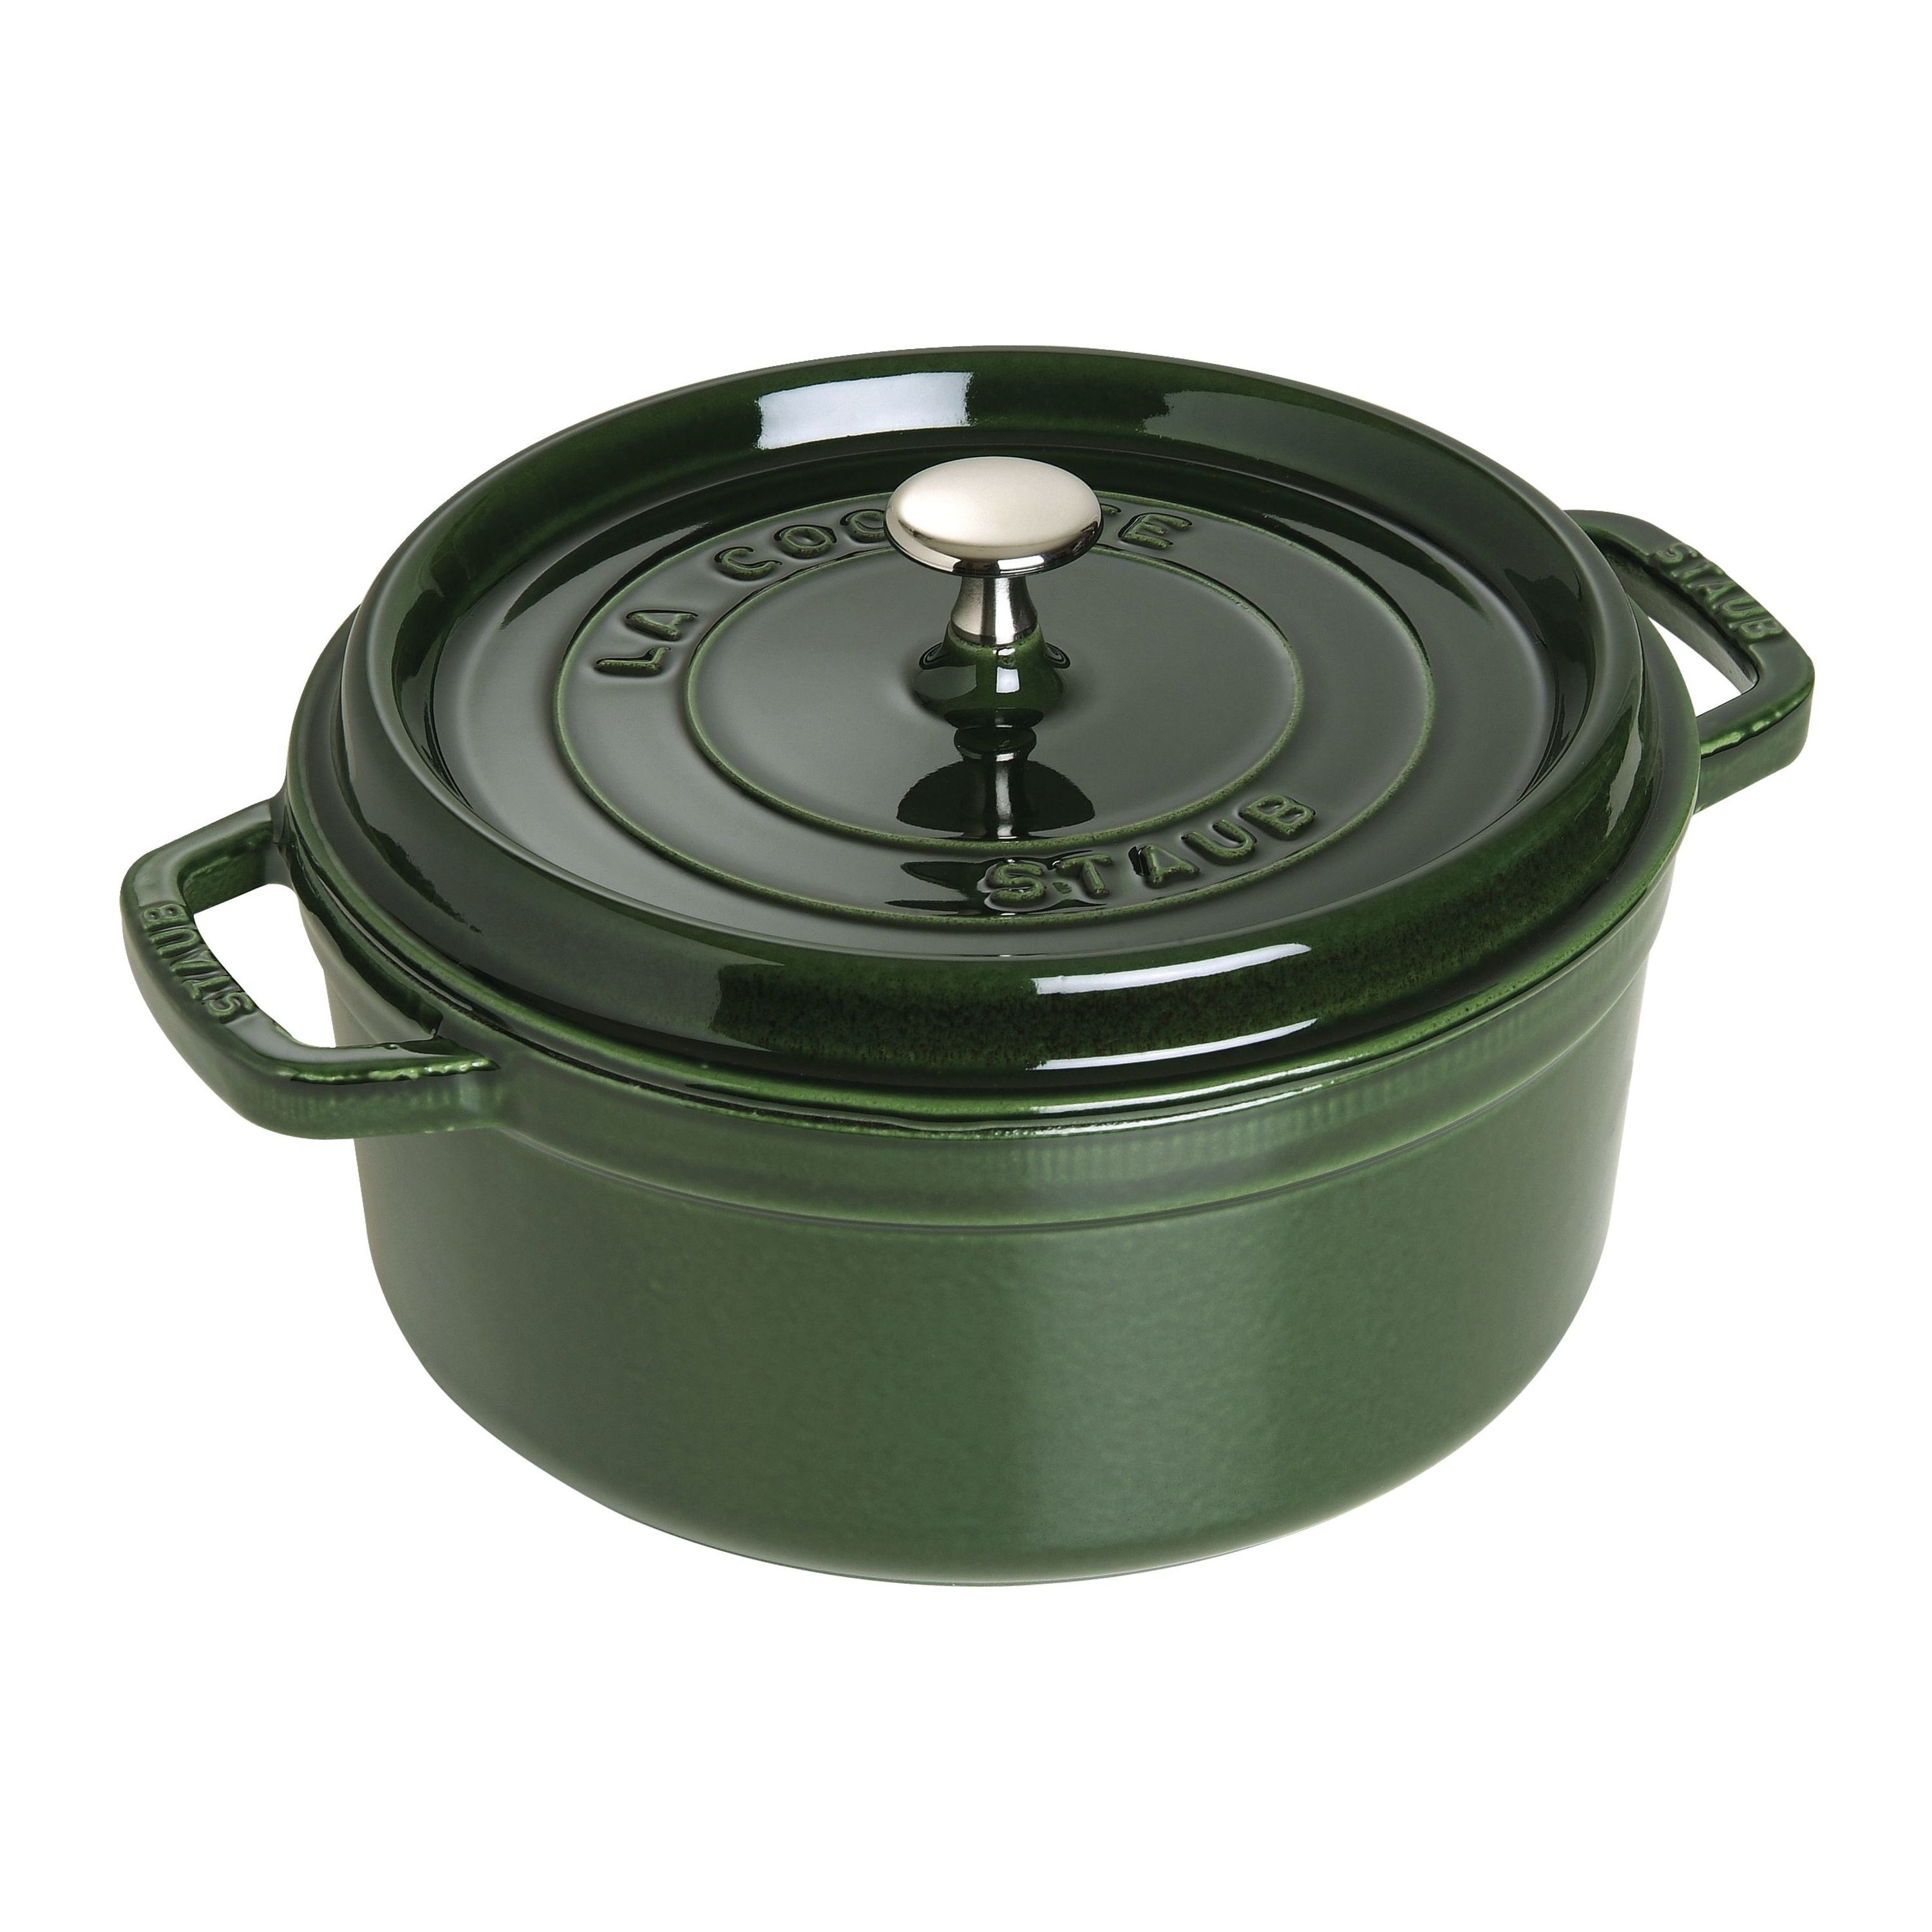 Details about   Round Grill Pan or Dutch Kitchen Enameled Cast Iron Cookware Oven Cooking Dining 